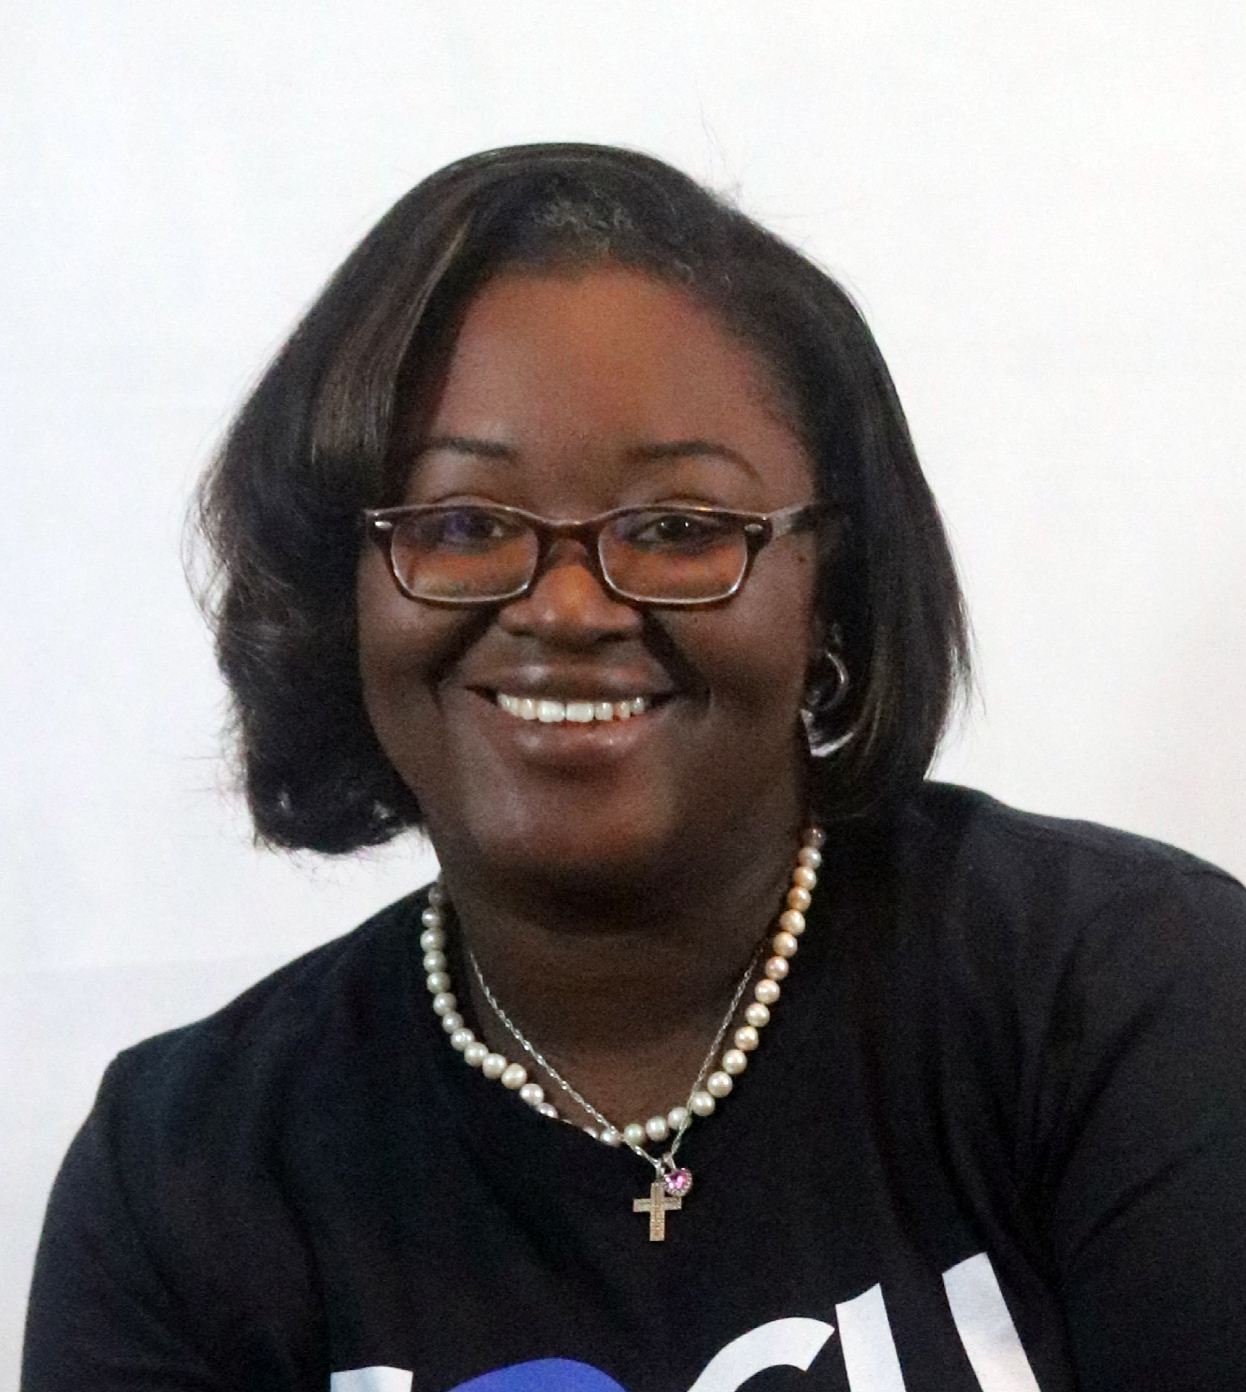 La'Quata Sumter is Education Technology Consultant at Adorama Business Solutions.